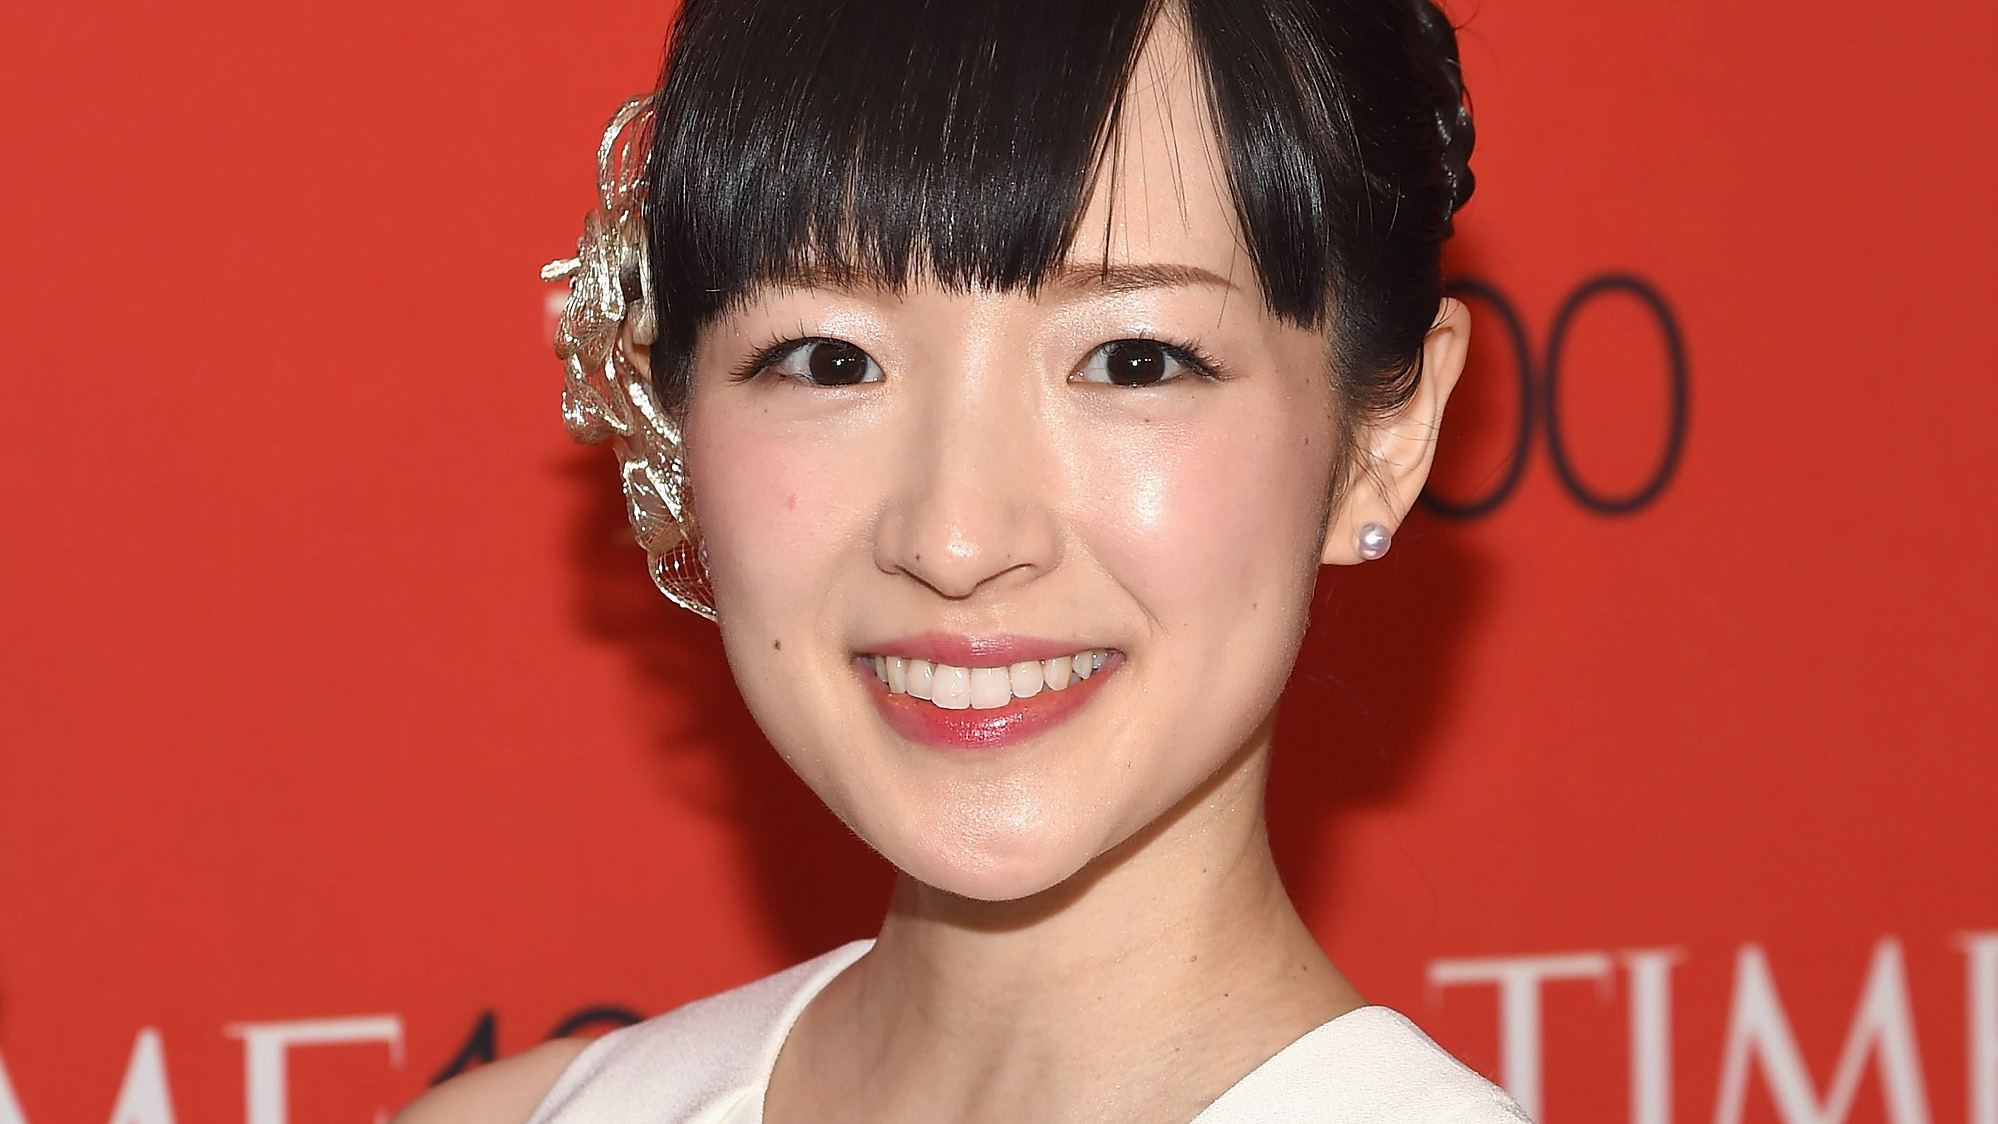 Author Marie Kondo attends TIME 100 Gala, TIME's 100 Most Influential People In The World at Frederick P. Rose Hall, Jazz at Lincoln Center on April 21, 2015 in New York City.